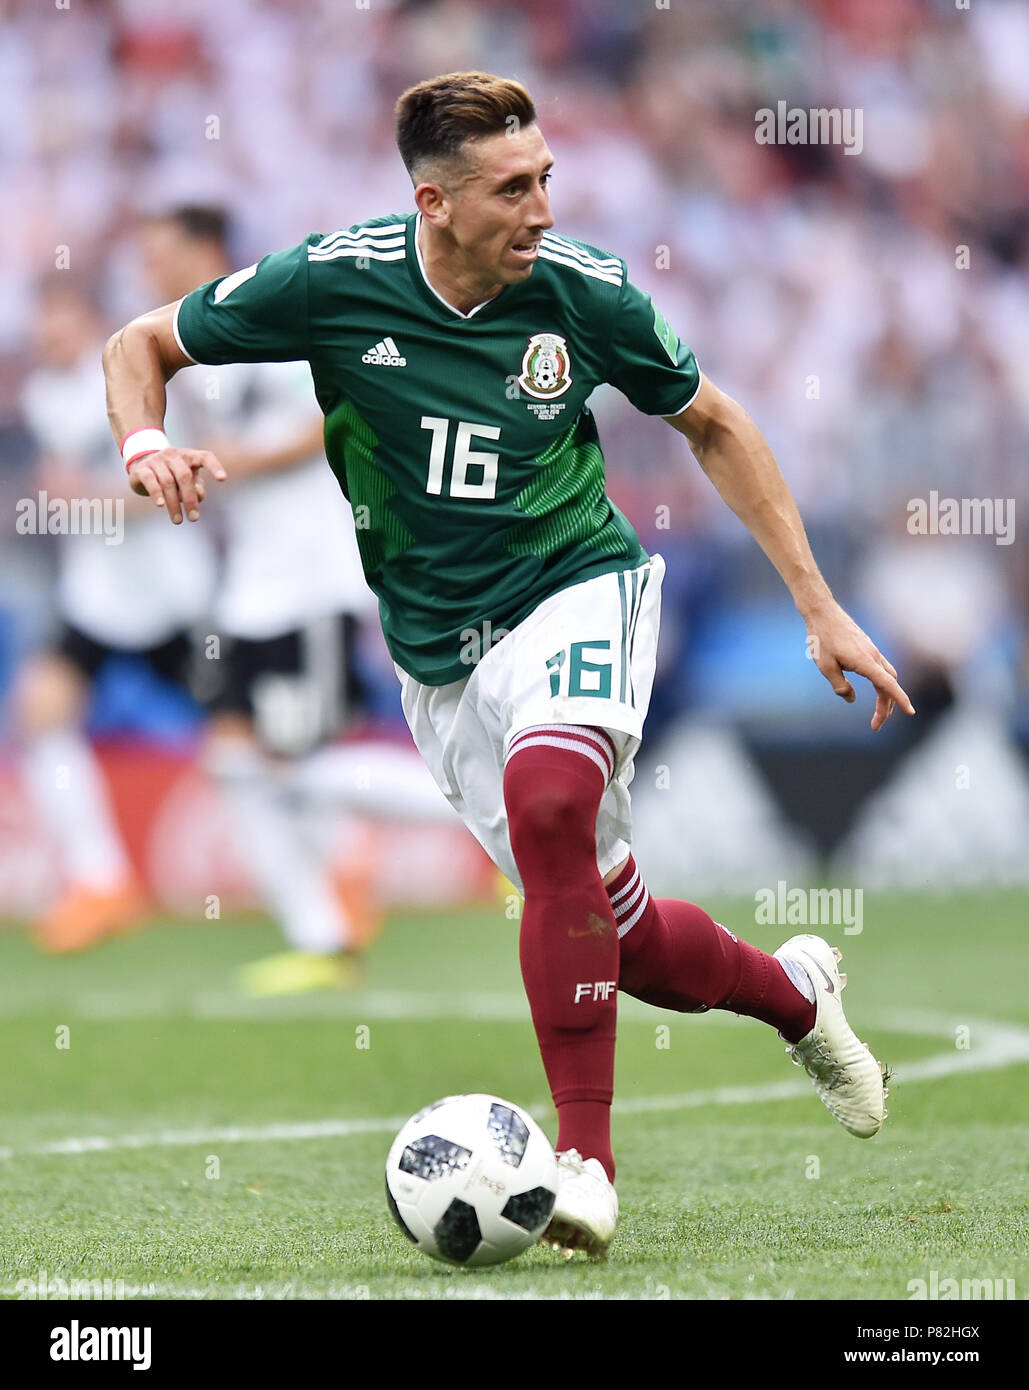 MOSCOW, RUSSIA - JUNE 17: Hector Herrera of Mexico in action during the 2018 FIFA World Cup Russia group F match between Germany and Mexico at Luzhniki Stadium on June 17, 2018 in Moscow, Russia. (Photo by Lukasz Laskowski/PressFocus/MB Media) Stock Photo